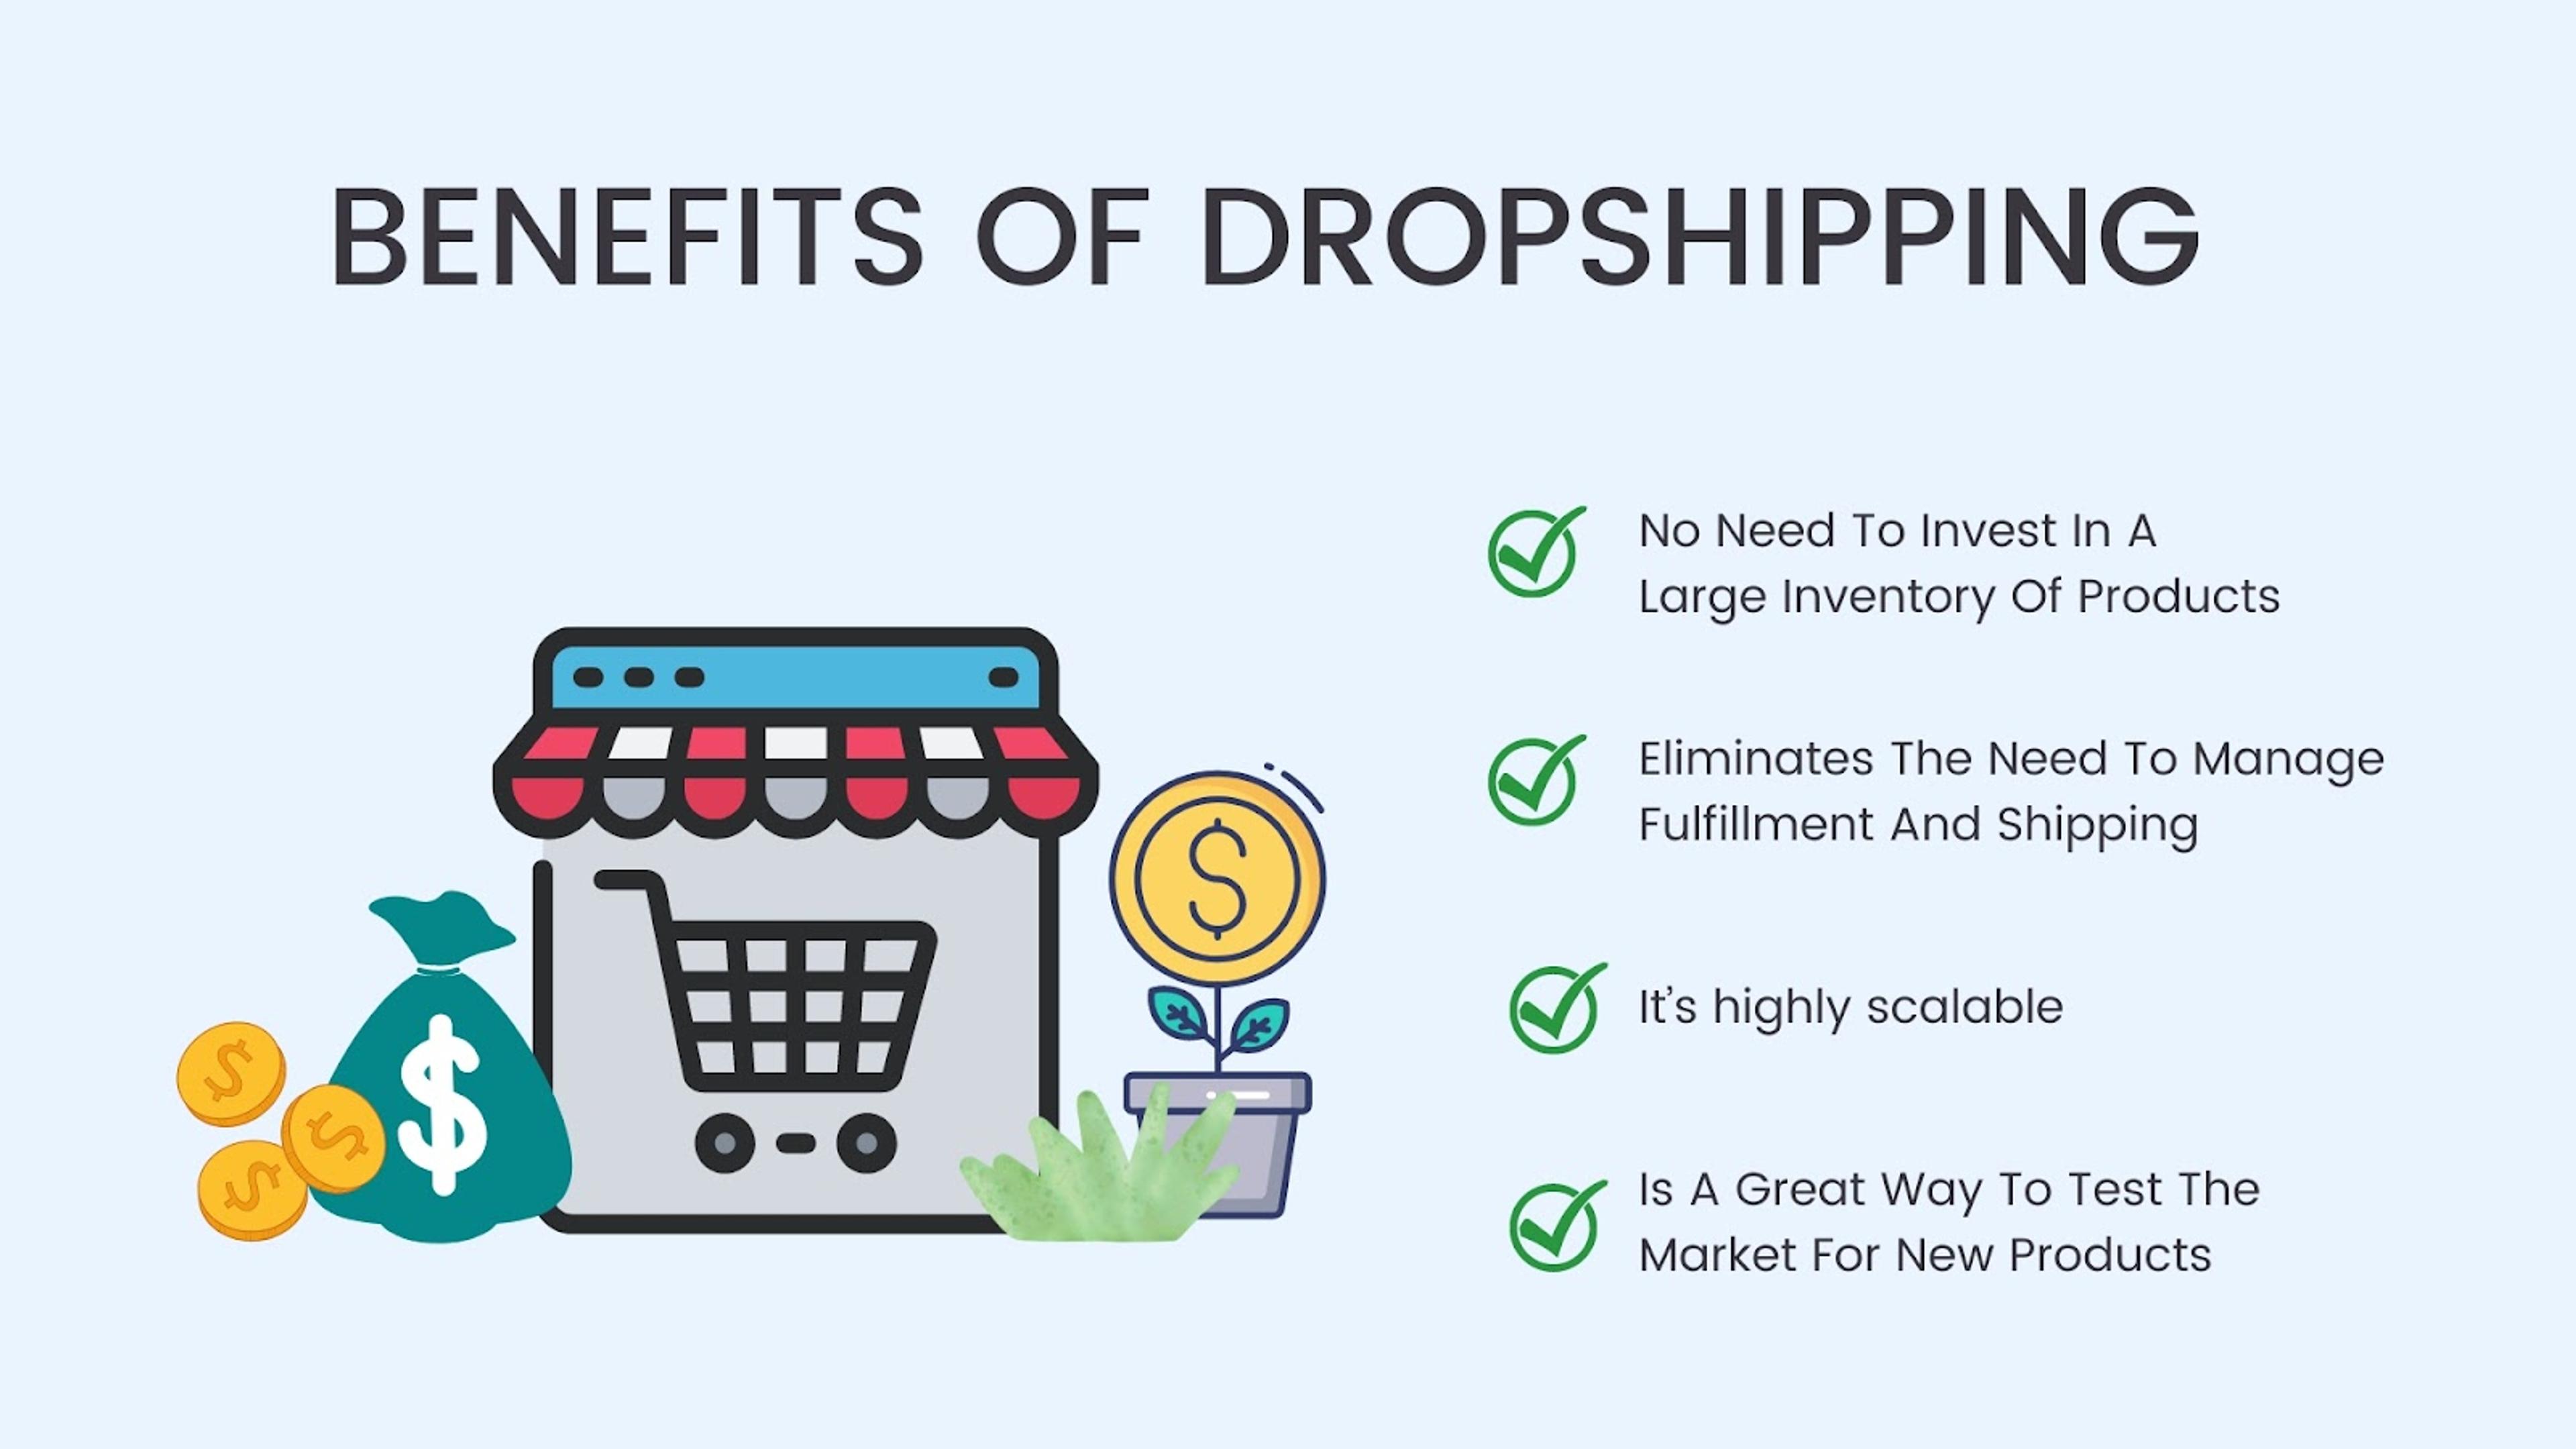 Benefits of Dropshipping